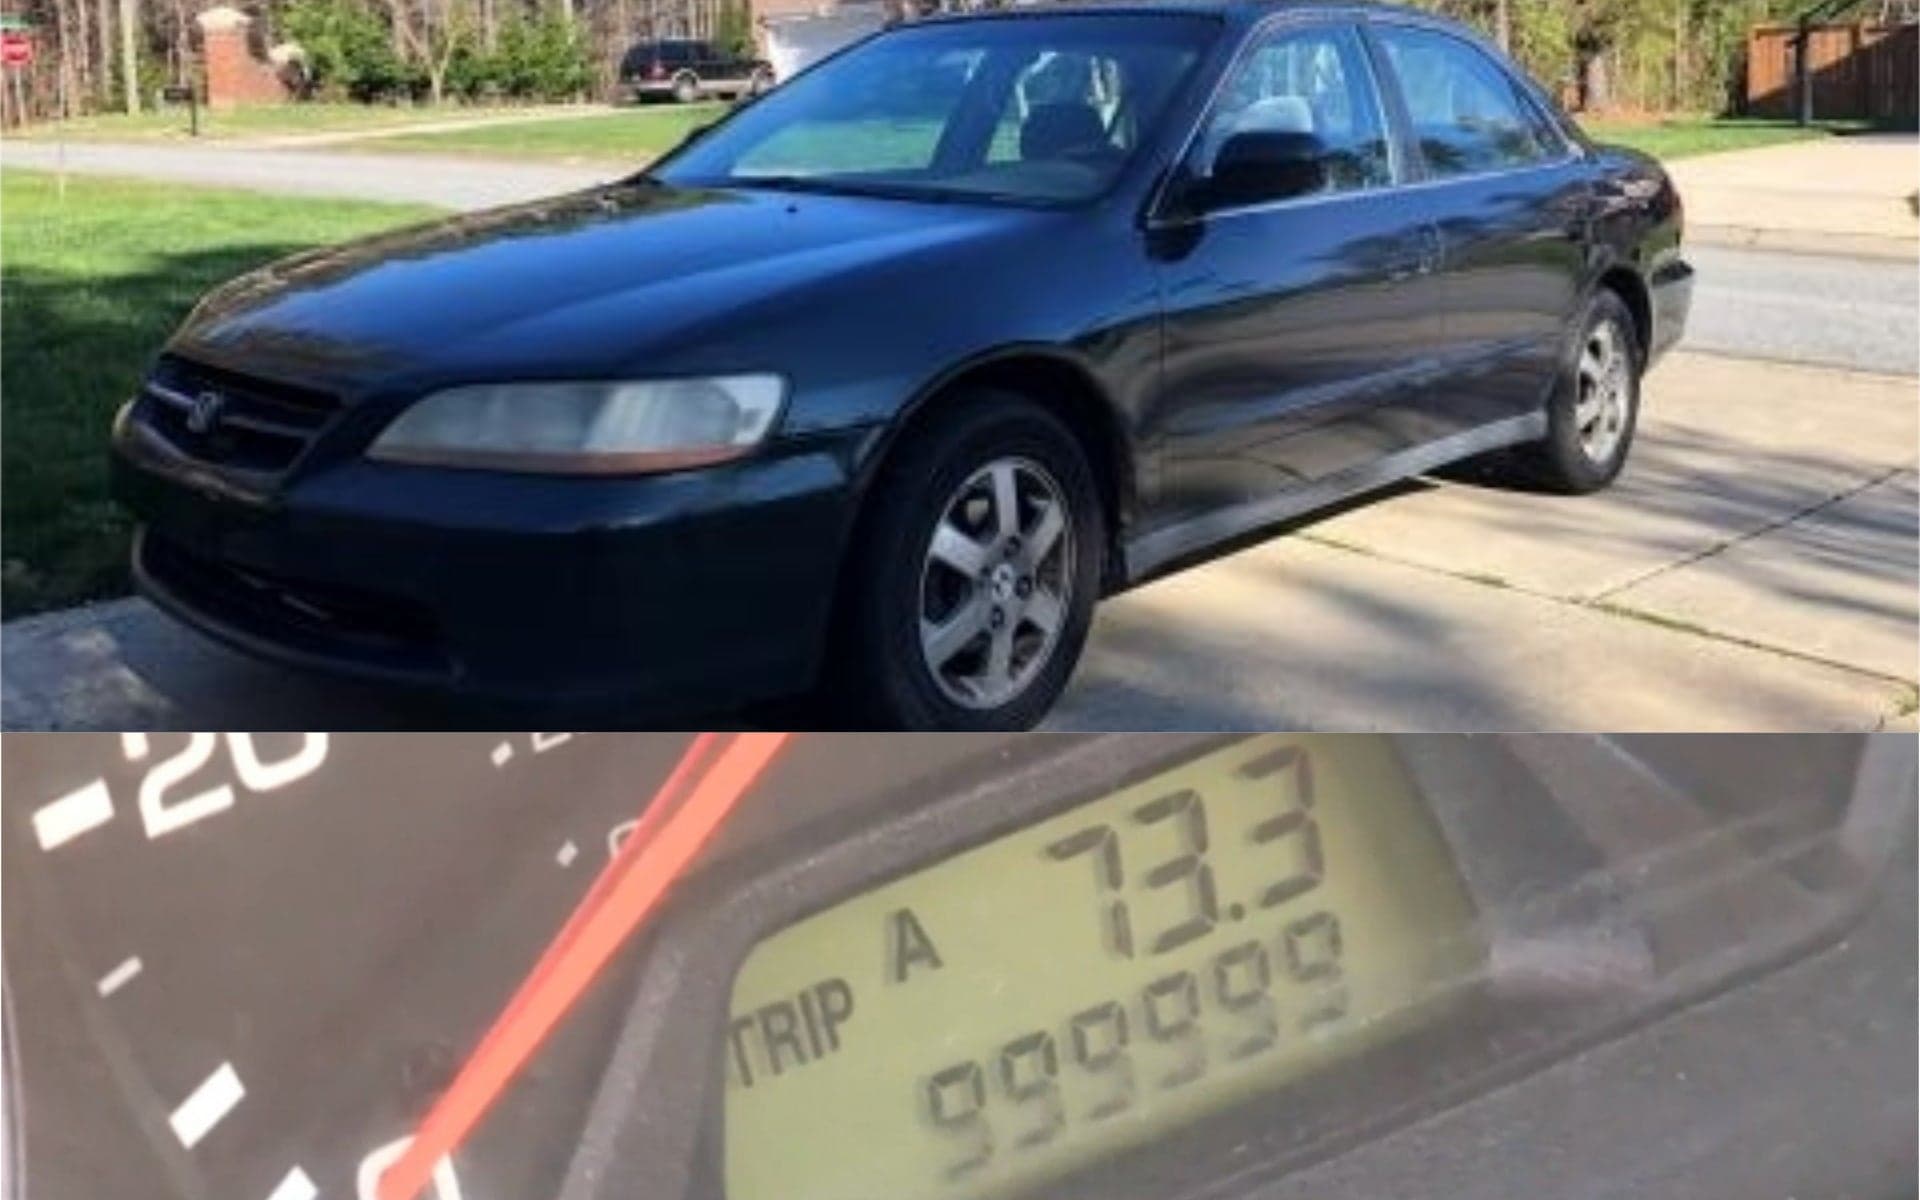 2000 Honda Accord With Over 1 Million Miles Surfaces in North Carolina